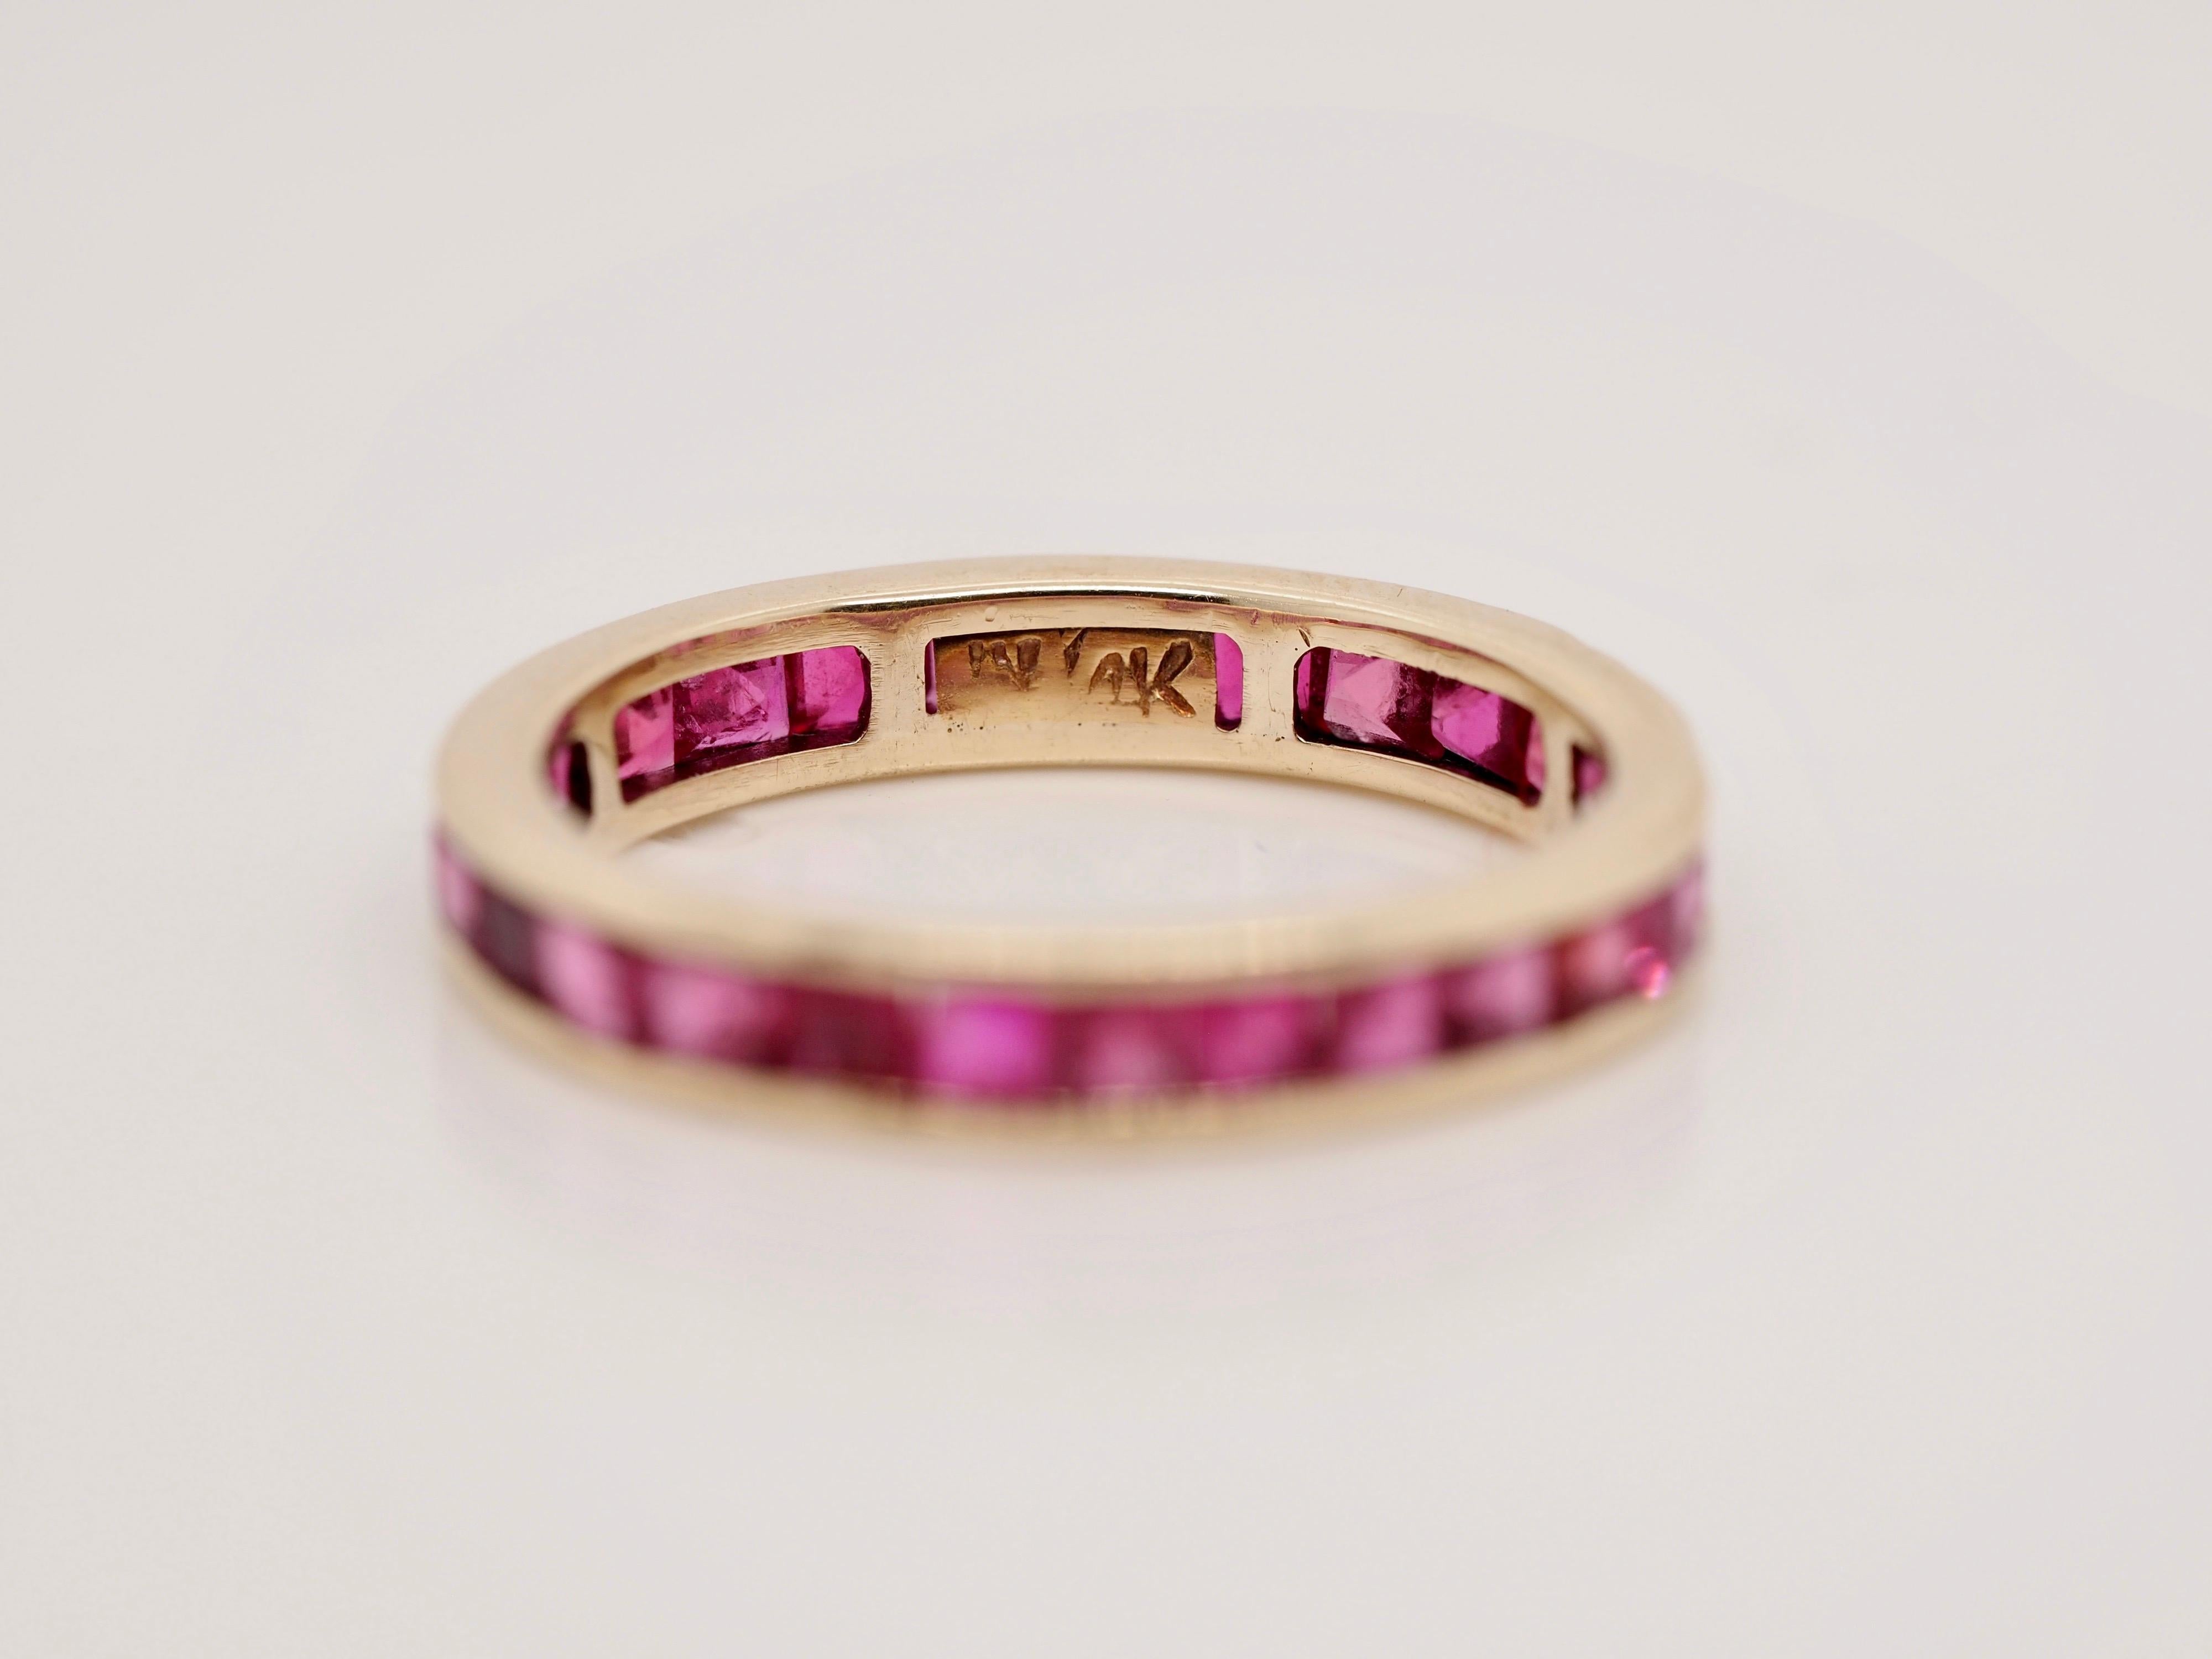 This piece is a great example of a vintage stackable ring! The smooth 14K yellow gold channel perfectly compliments the 3.78 carats of beautiful magenta princess cut rubies! There is a pierced open back pattern throughout the ring to allow light and